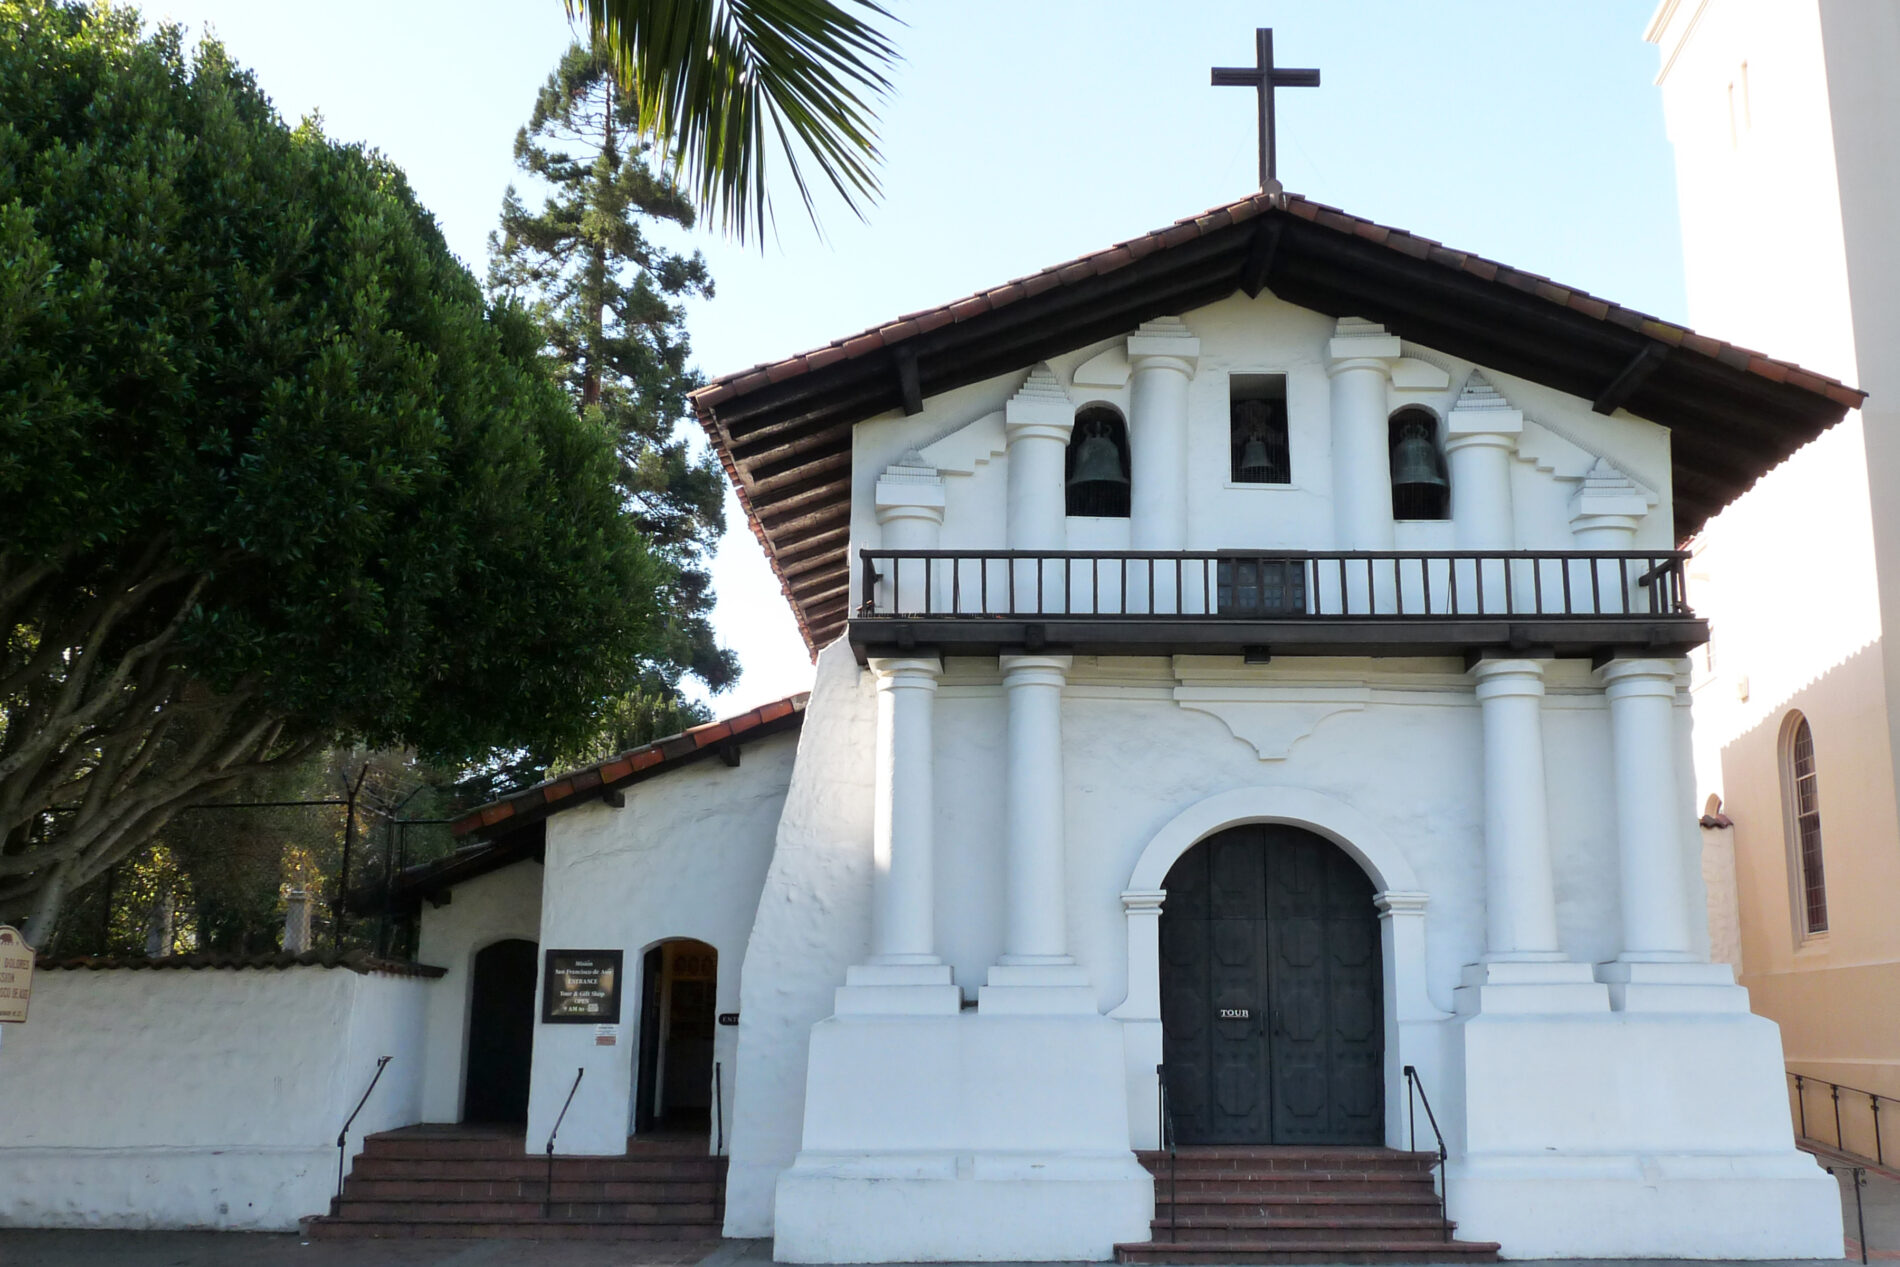 Mission Dolores, built in 1776, is the oldest surviving building in San Francisco.